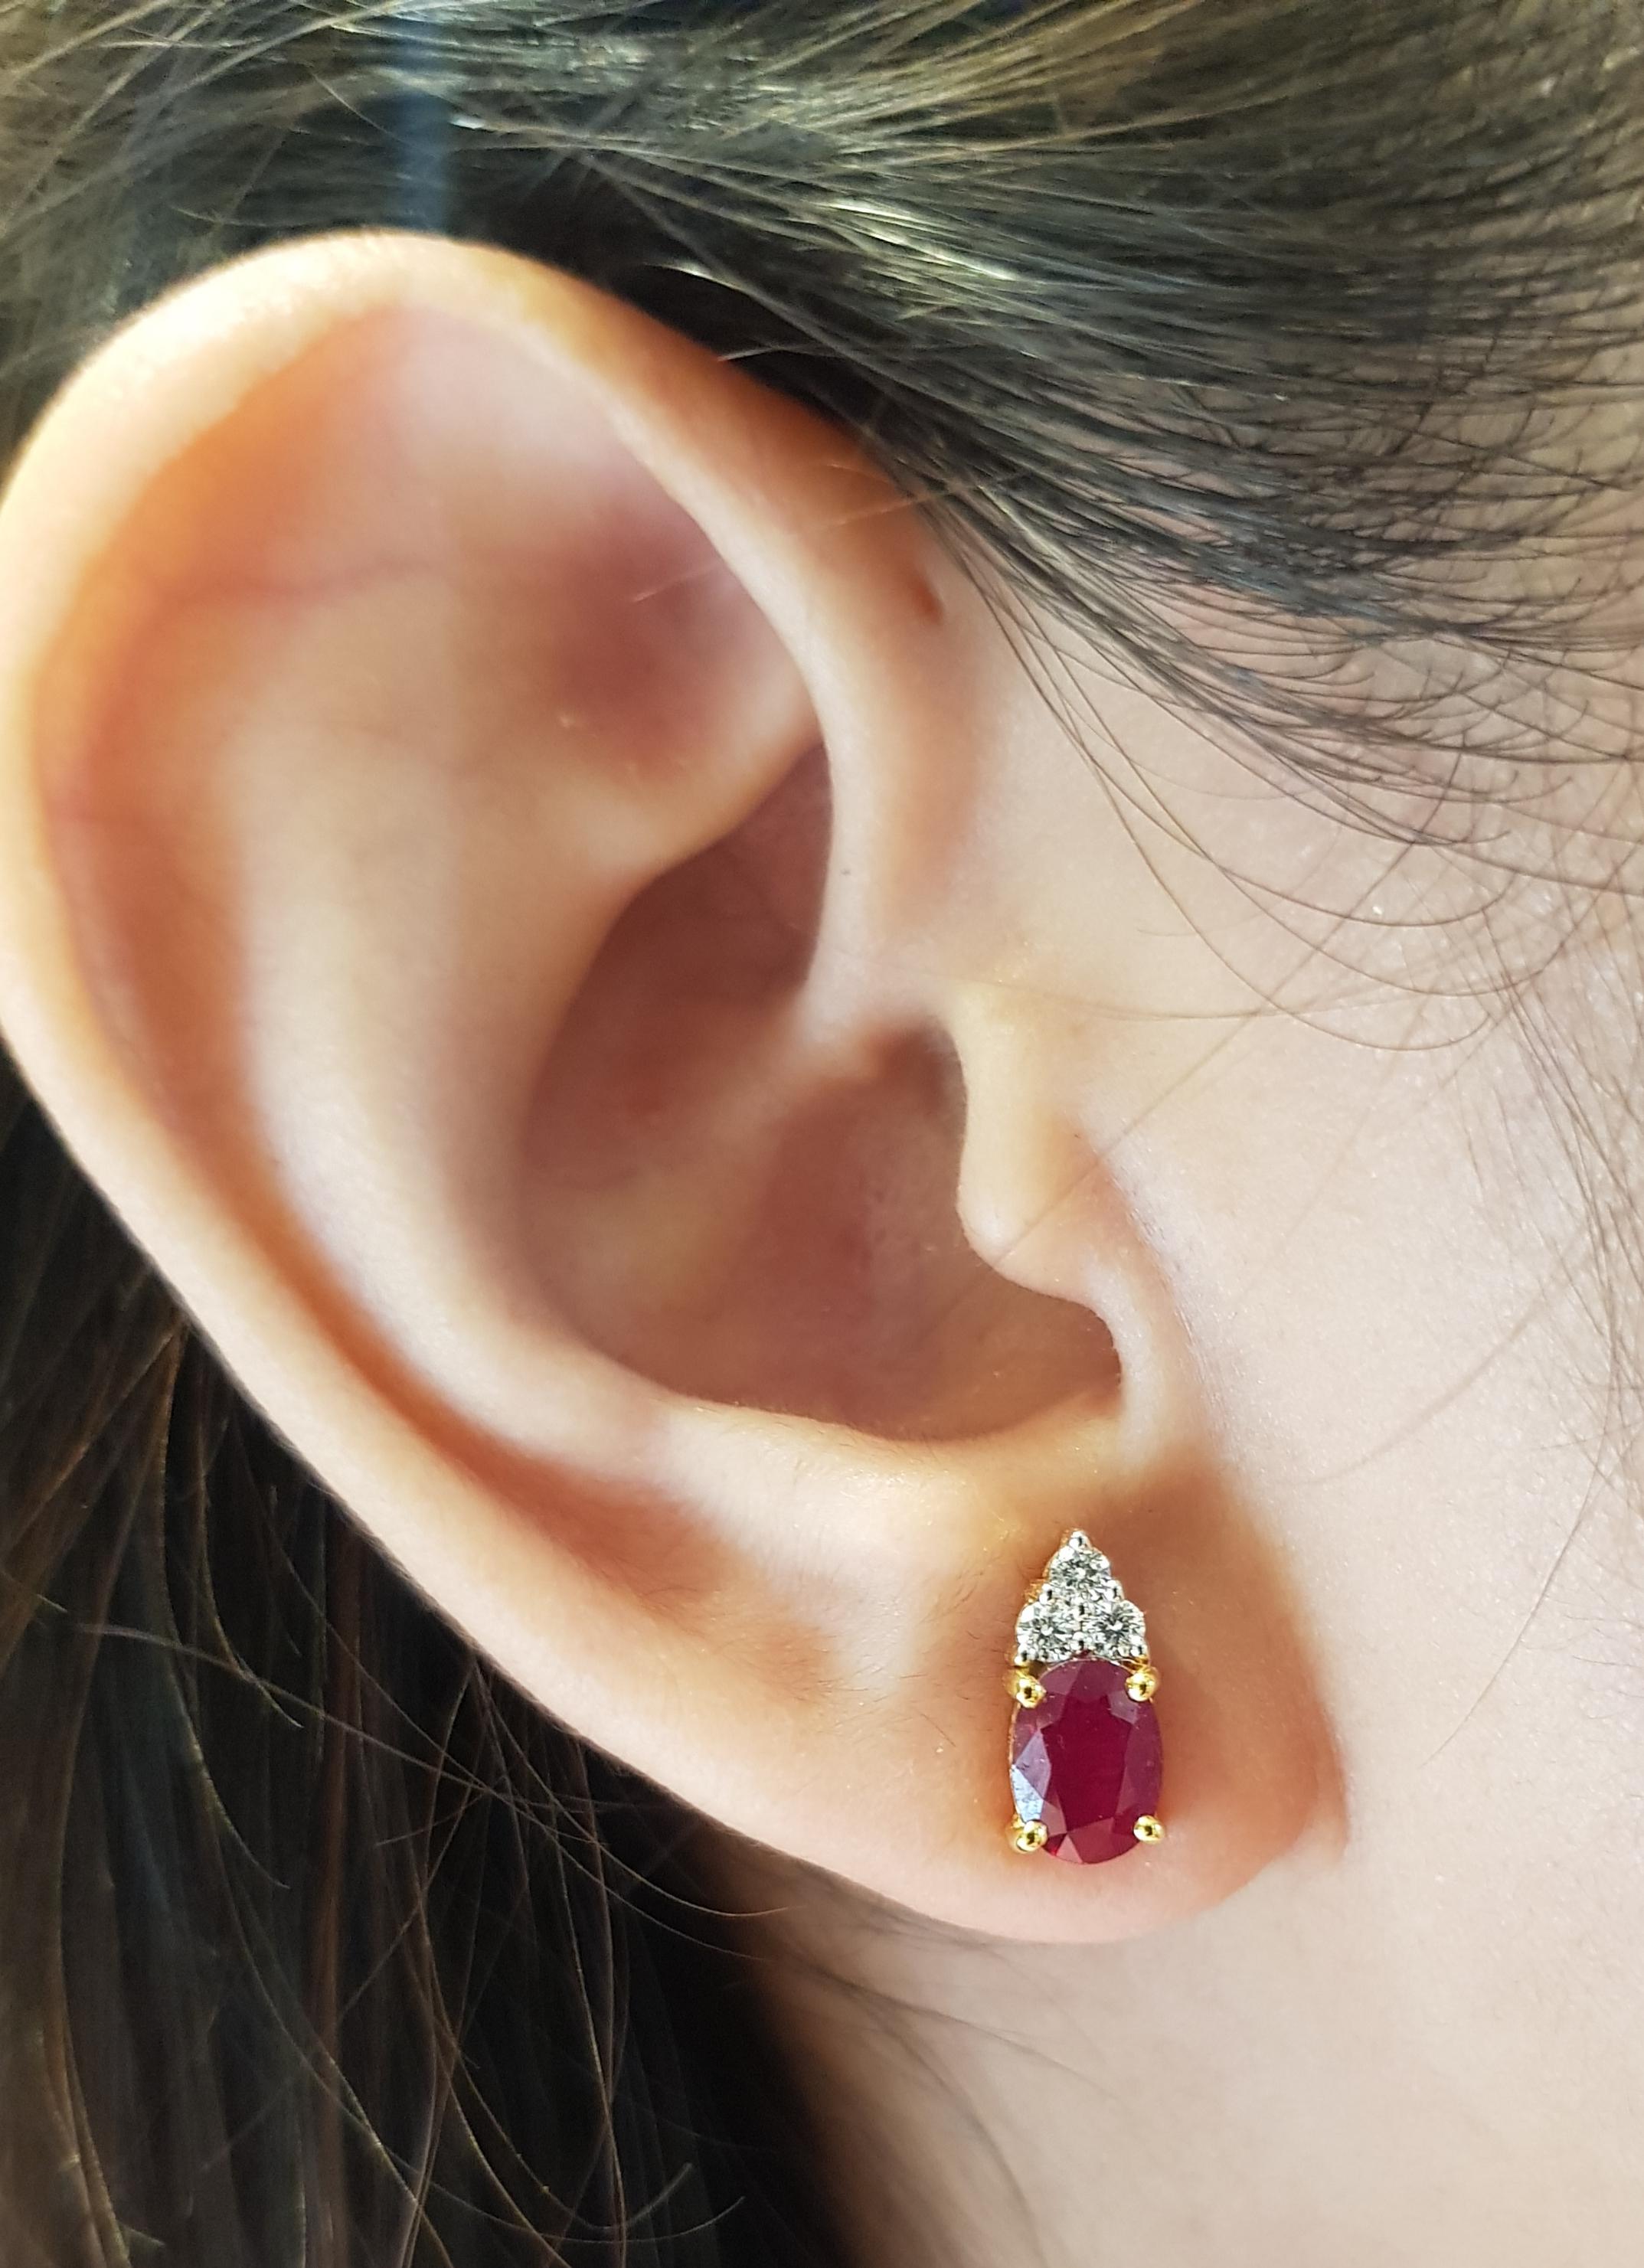 Ruby 1.06 carats with Diamond 0.07 carat Earrings set in 18 Karat Gold Settings

Width:  0.4 cm 
Length:  0.9 cm
Total Weight: 2.71 grams

